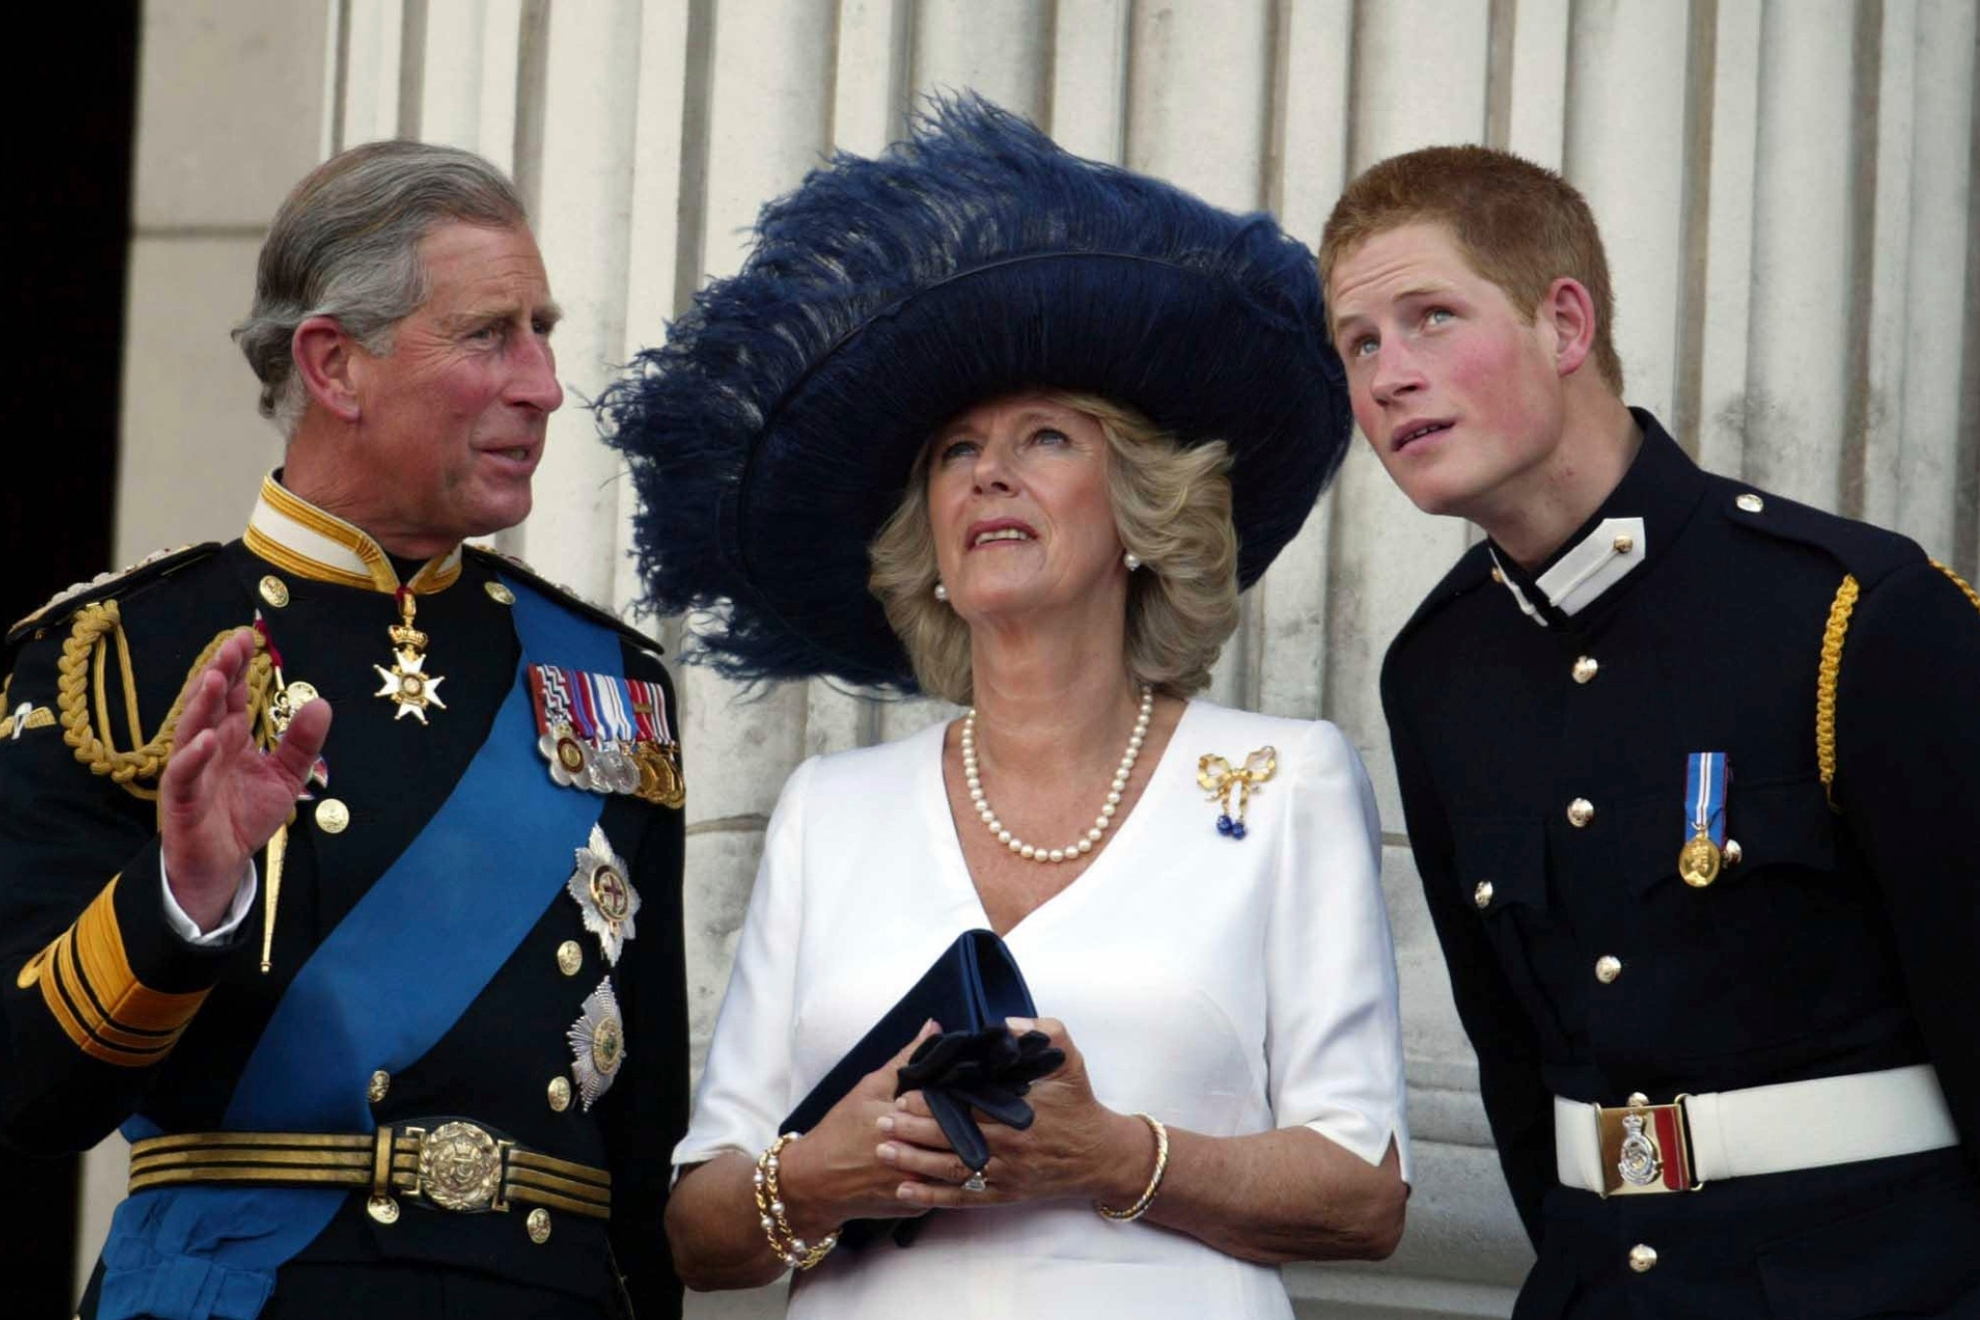 Royal Family at a public event.